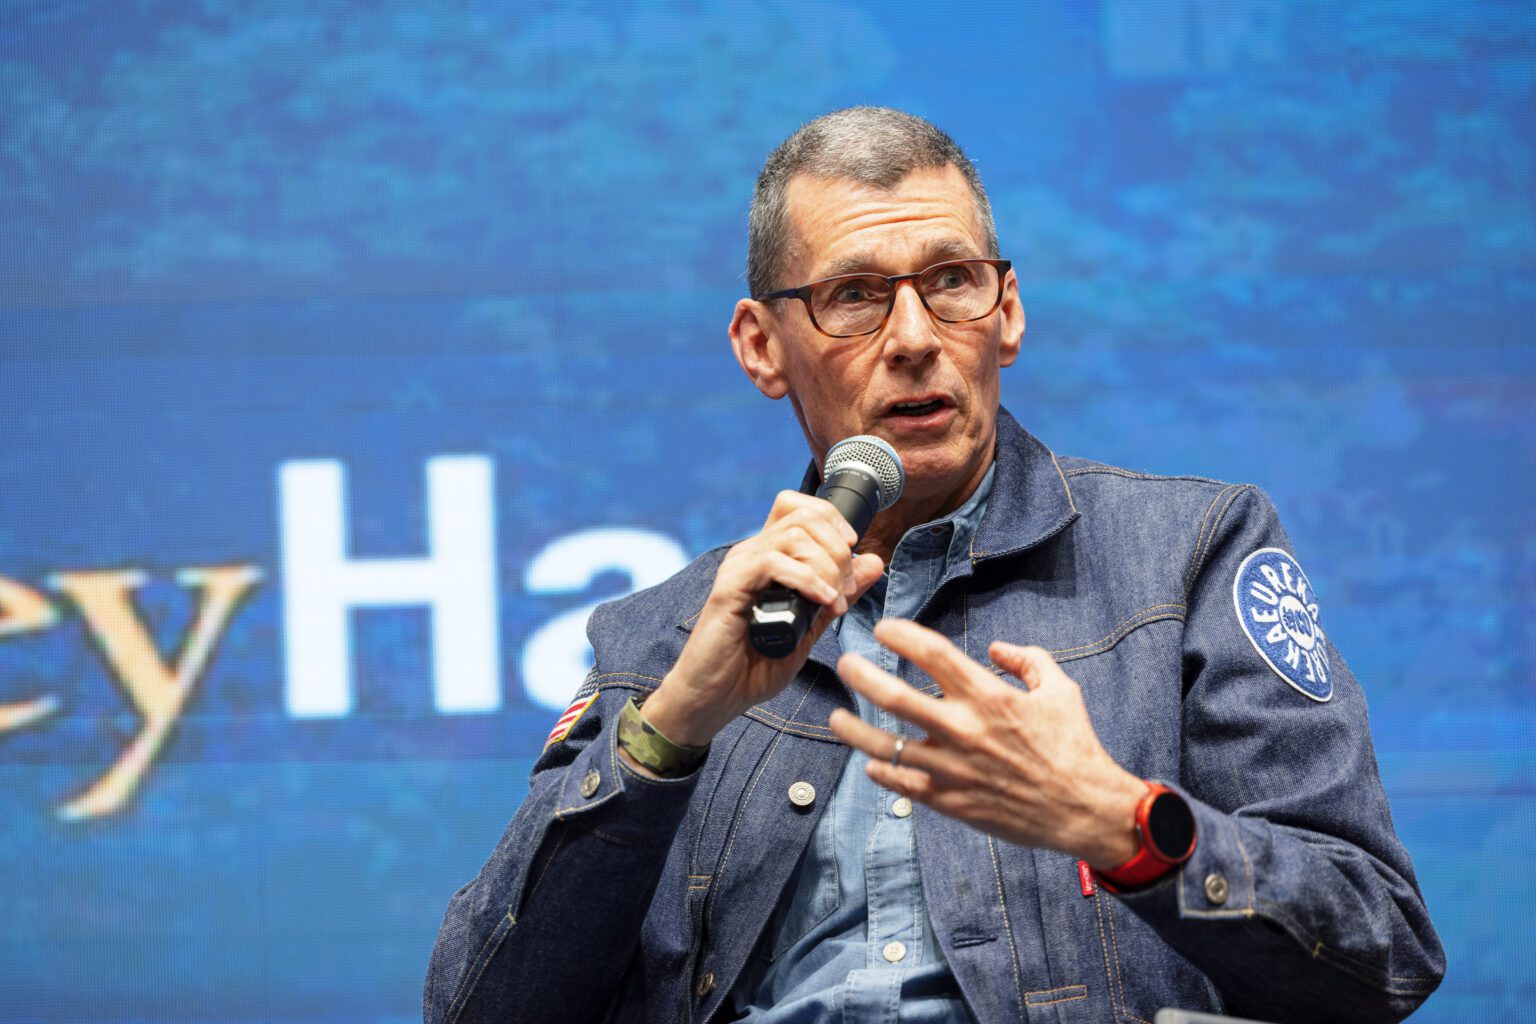 Photo of Chip Bergh, Former CEO of Levi Strauss & Co. sitting and talking at Dean Speaker Series.